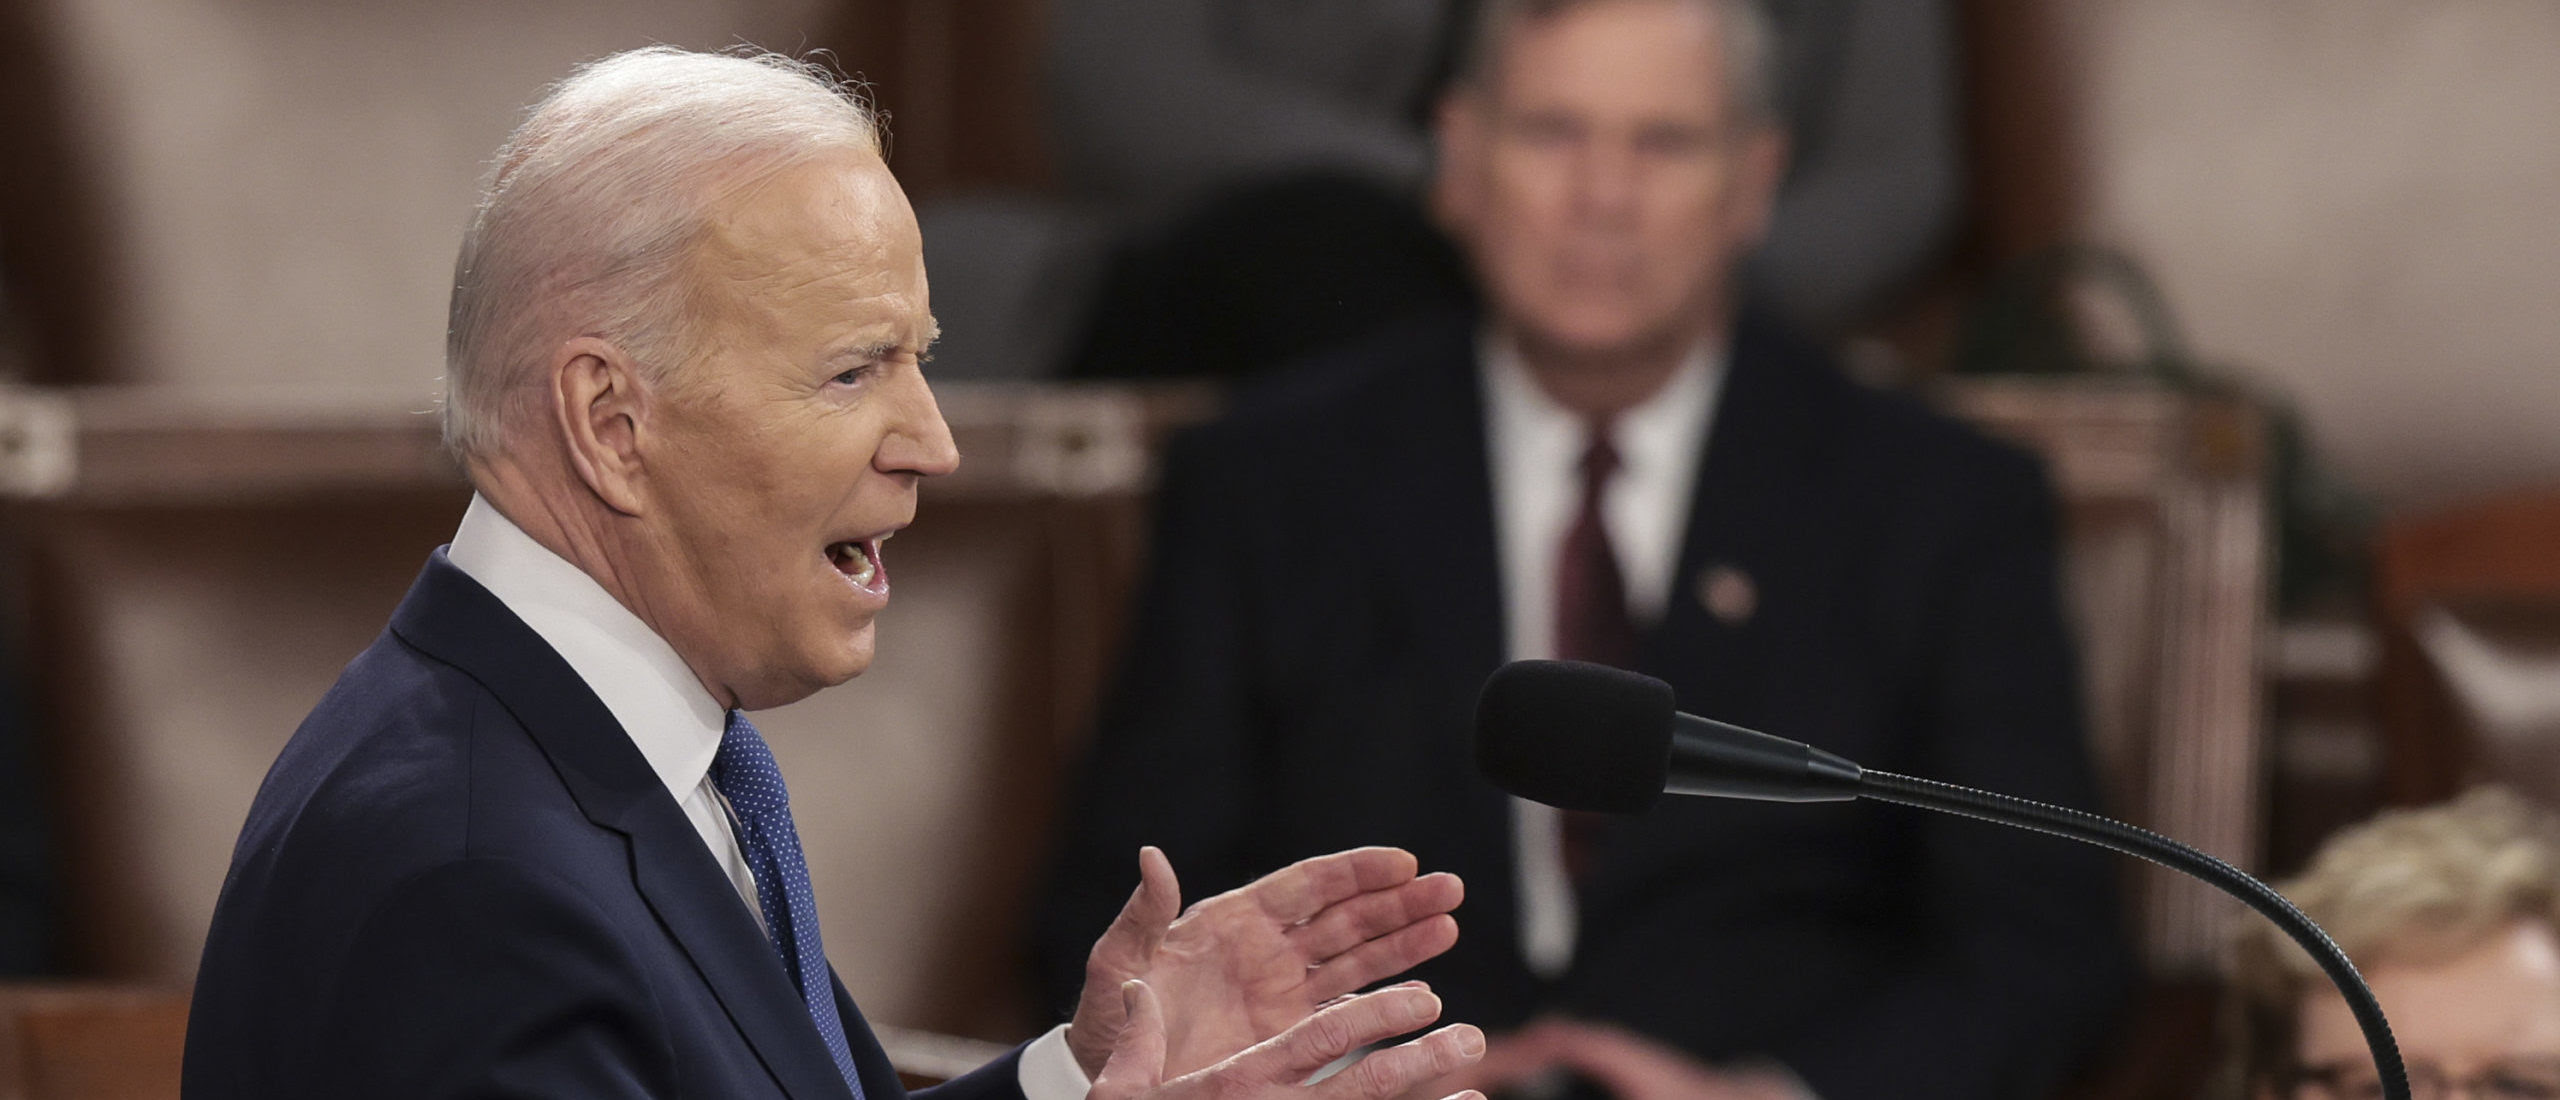 Editor Daily Rundown: Biden Tries To Escape The Left In Surreal SOTU And Texas Primary Results Are In